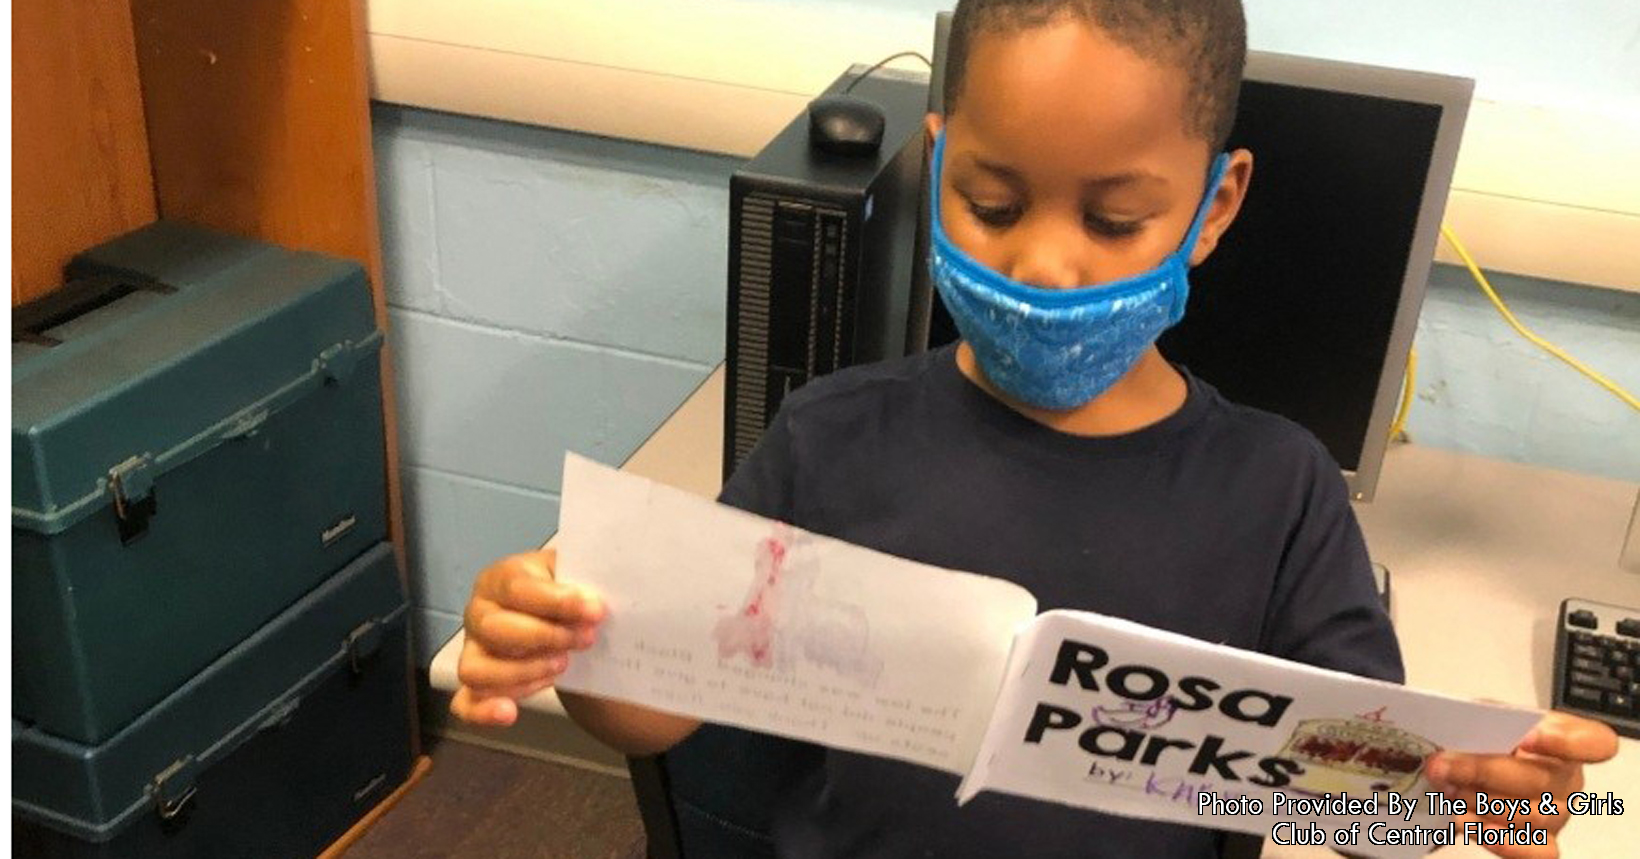 A simple book on Rosa Parks was chosen to be read at the program.